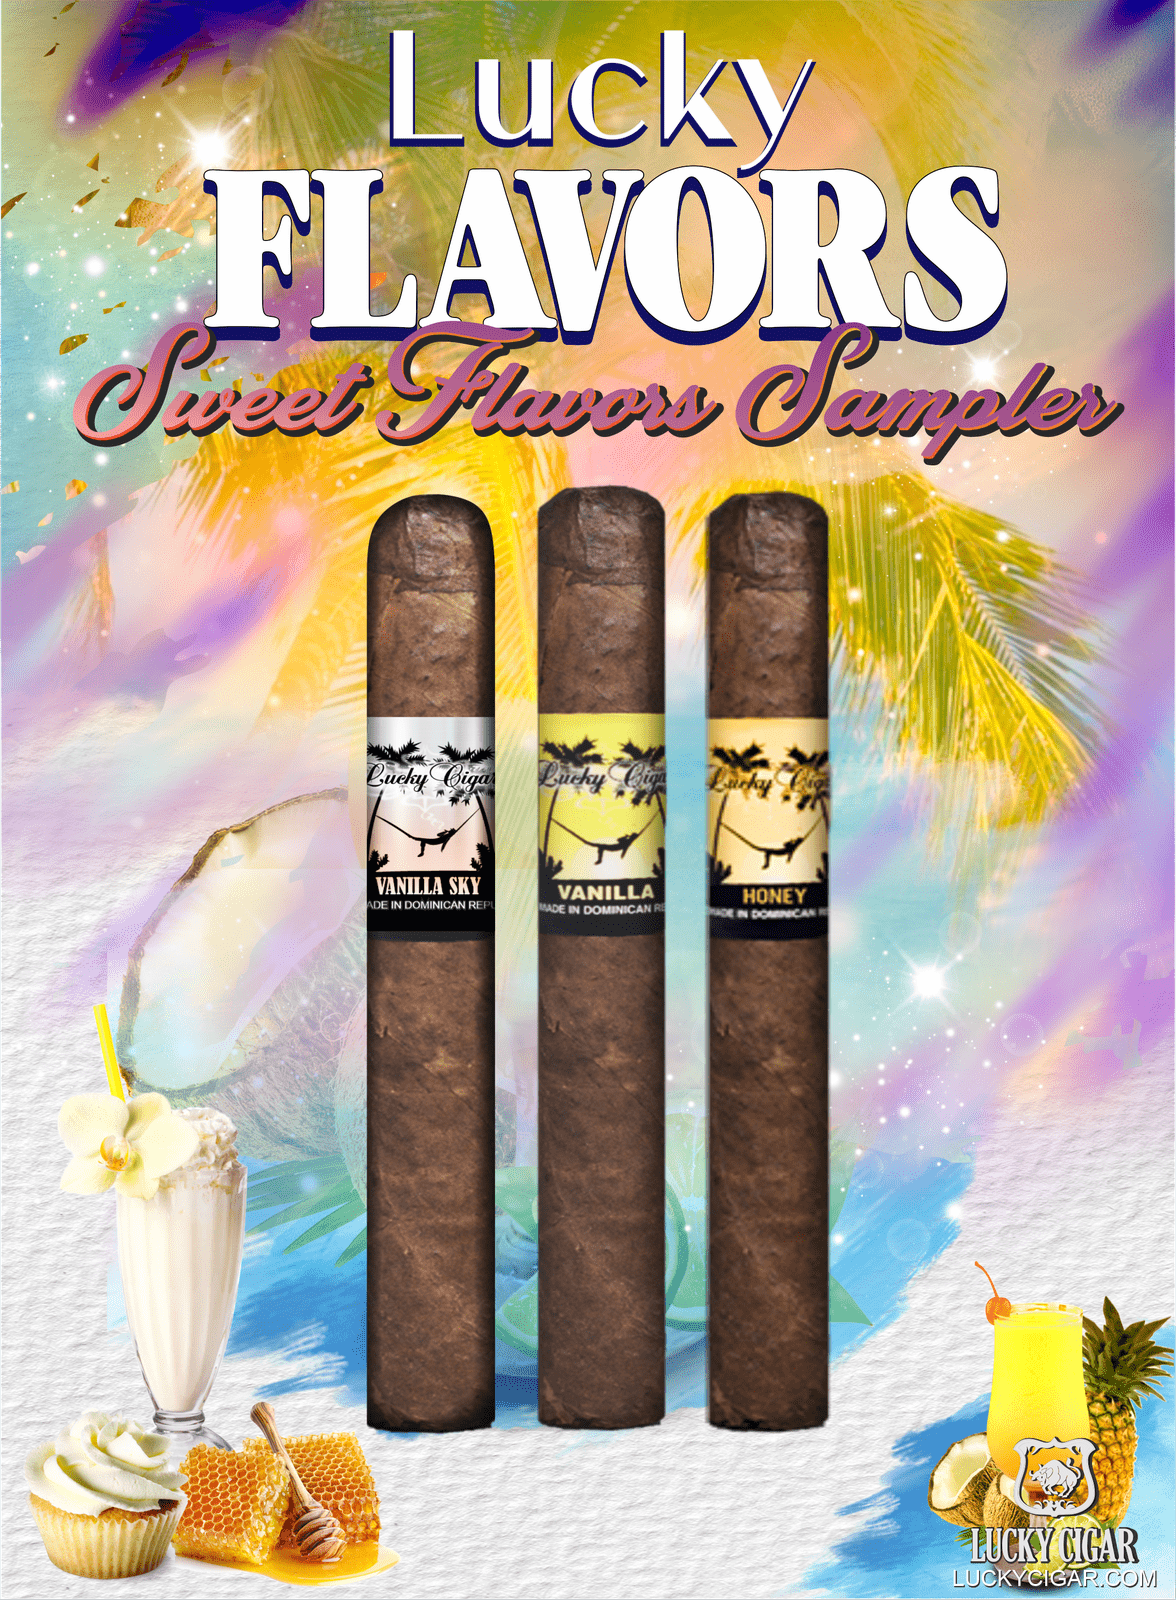 Flavored Cigars: Lucky Flavors 3 Piece Sweets Sampler - Vanilla Sky, Vanilla, Honey 1 Vanilla Sky 5x42 Cigar 1 Vanilla 5x42 Cigar 1 Honey 5x42 Cigar